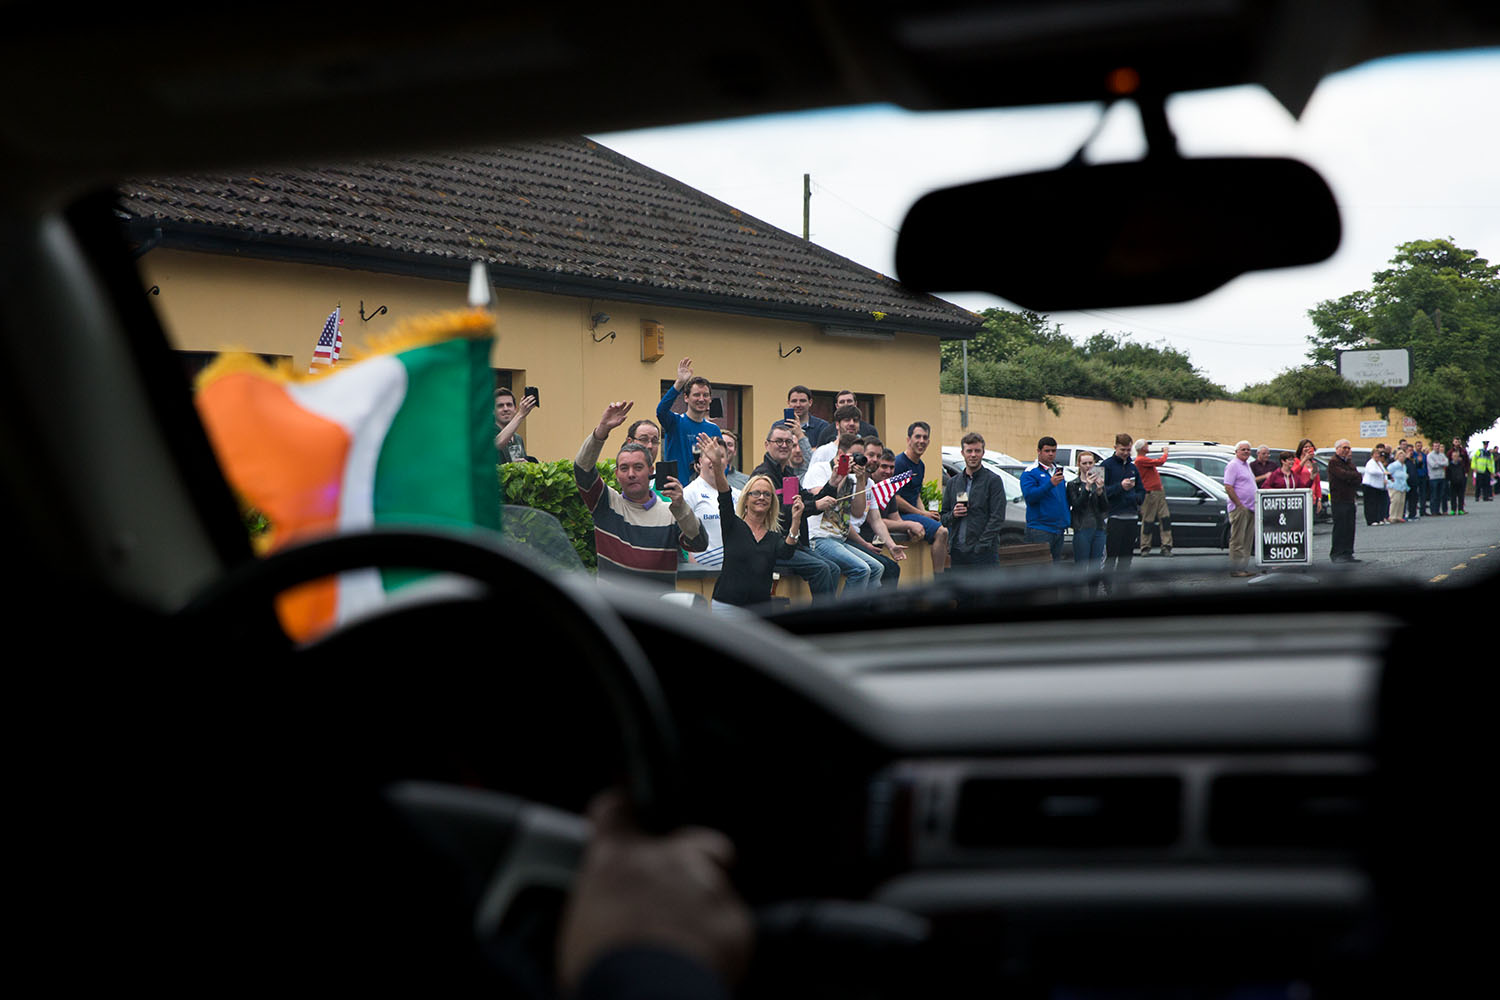 People waving american flags outside a pub along the motorcade route in County Louth, Ireland, June 25, 2016. (Official White House Photo by David Lienemann)